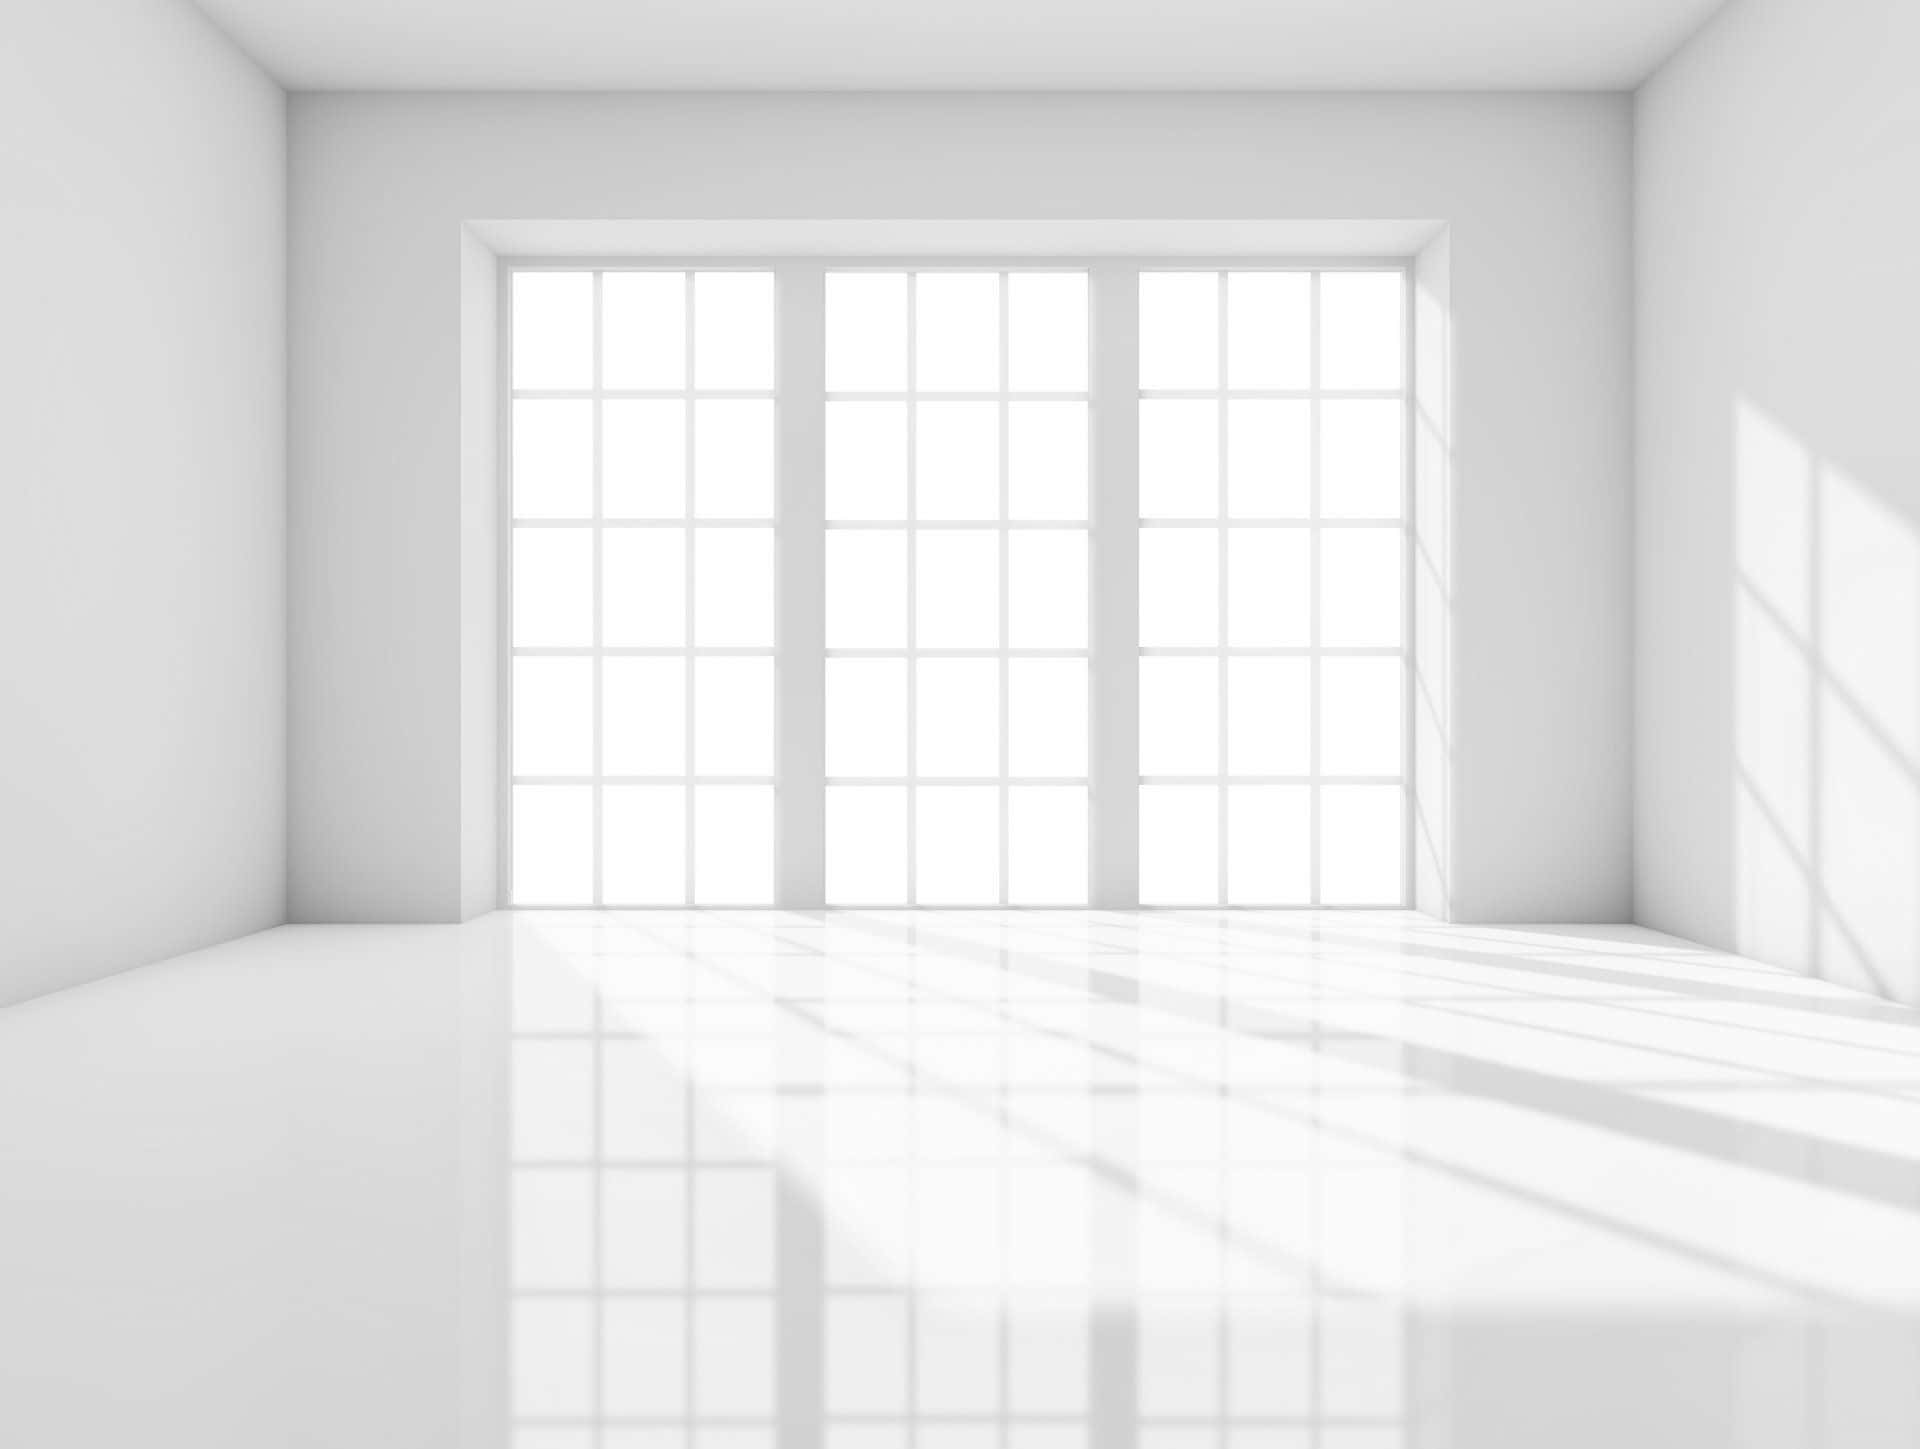 Empty Room With White Walls And Windows